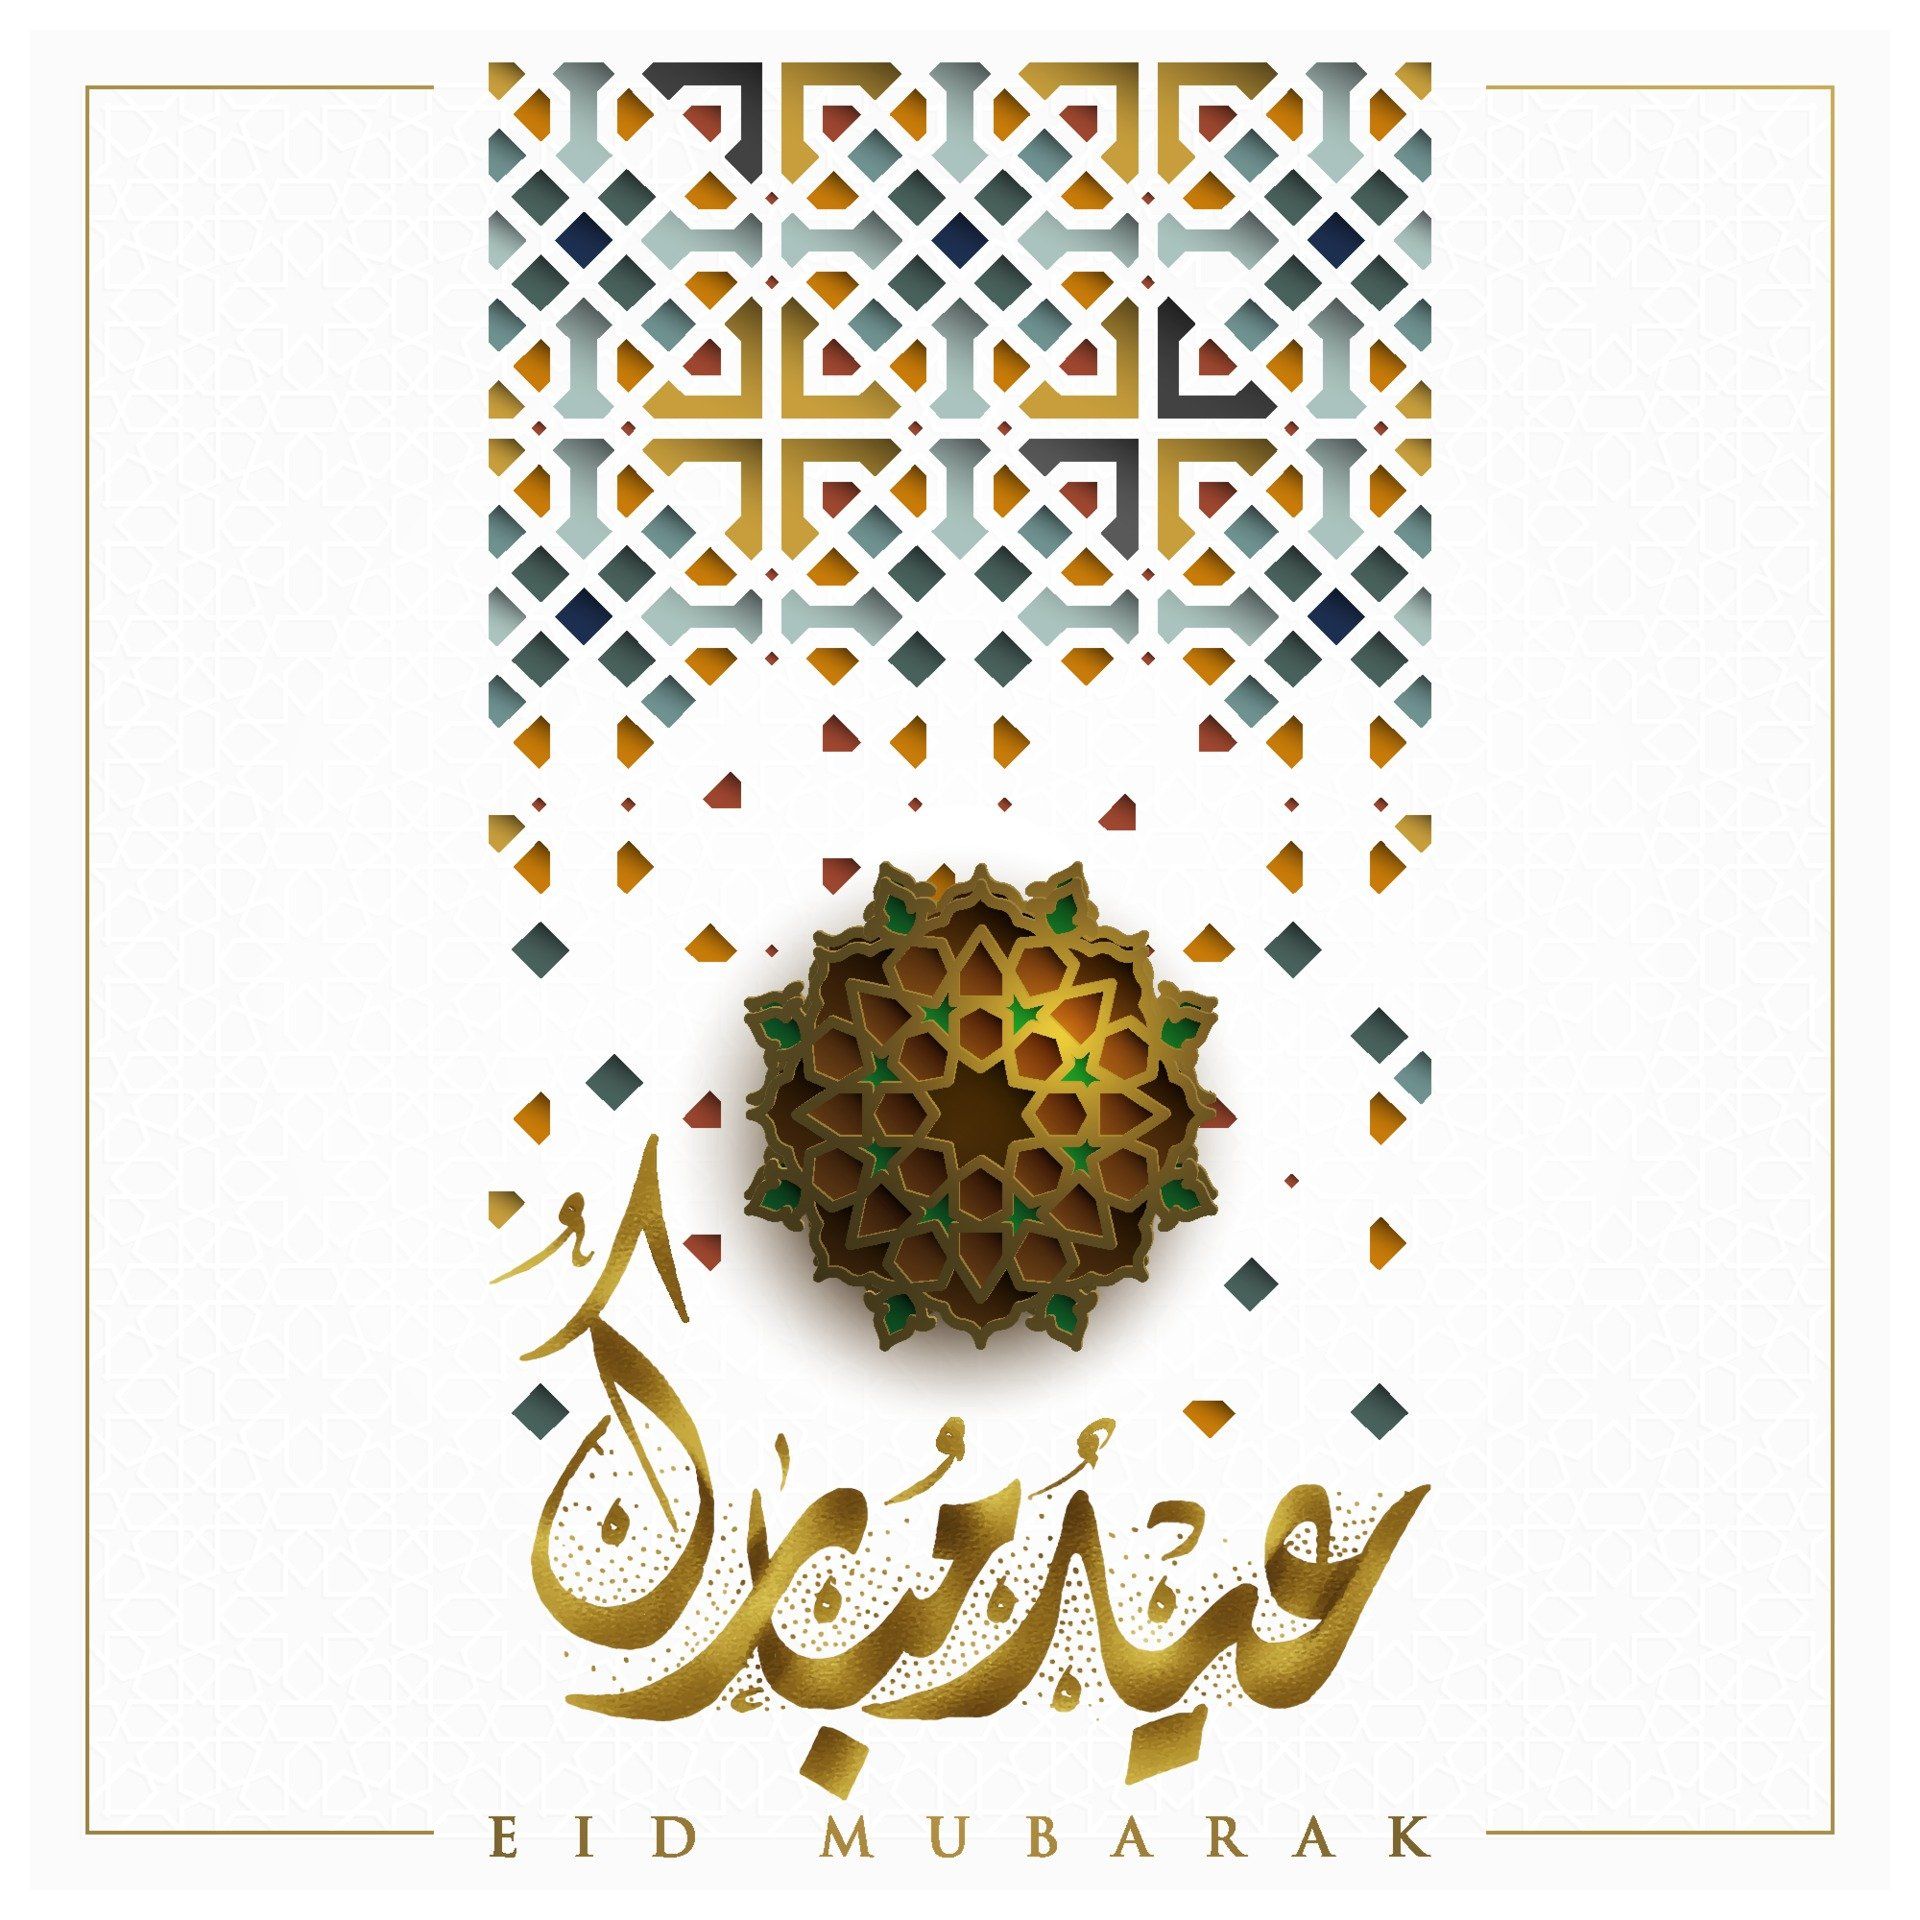 Eid Mubarak Greeting Card Islamic geometric Pattern vector design with beautiful arabic calligraphy for Background, wallpaper, banner, cover